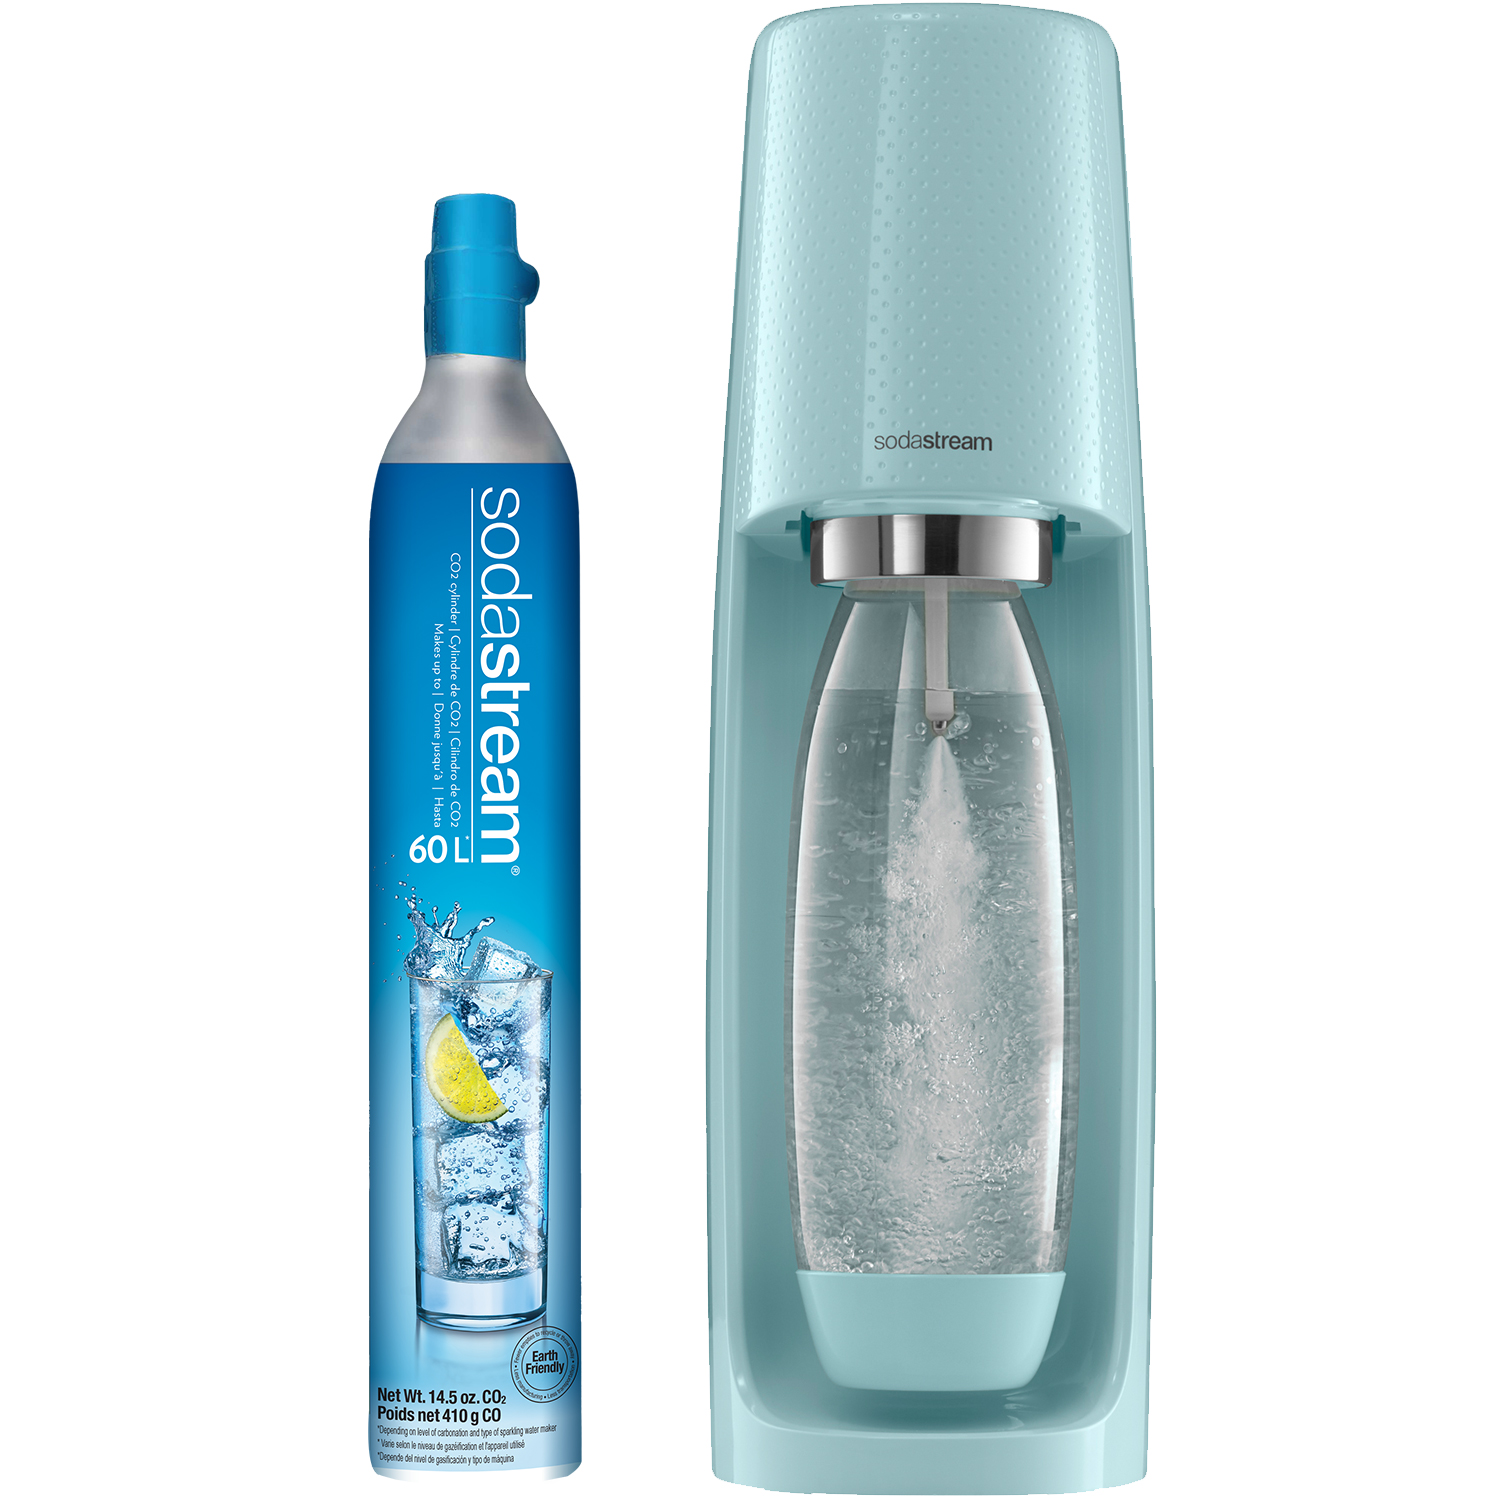 SodaStream Fizzi Sparkling Water Maker (Icy Blue) with CO2 and BPA free Bottle - image 1 of 7